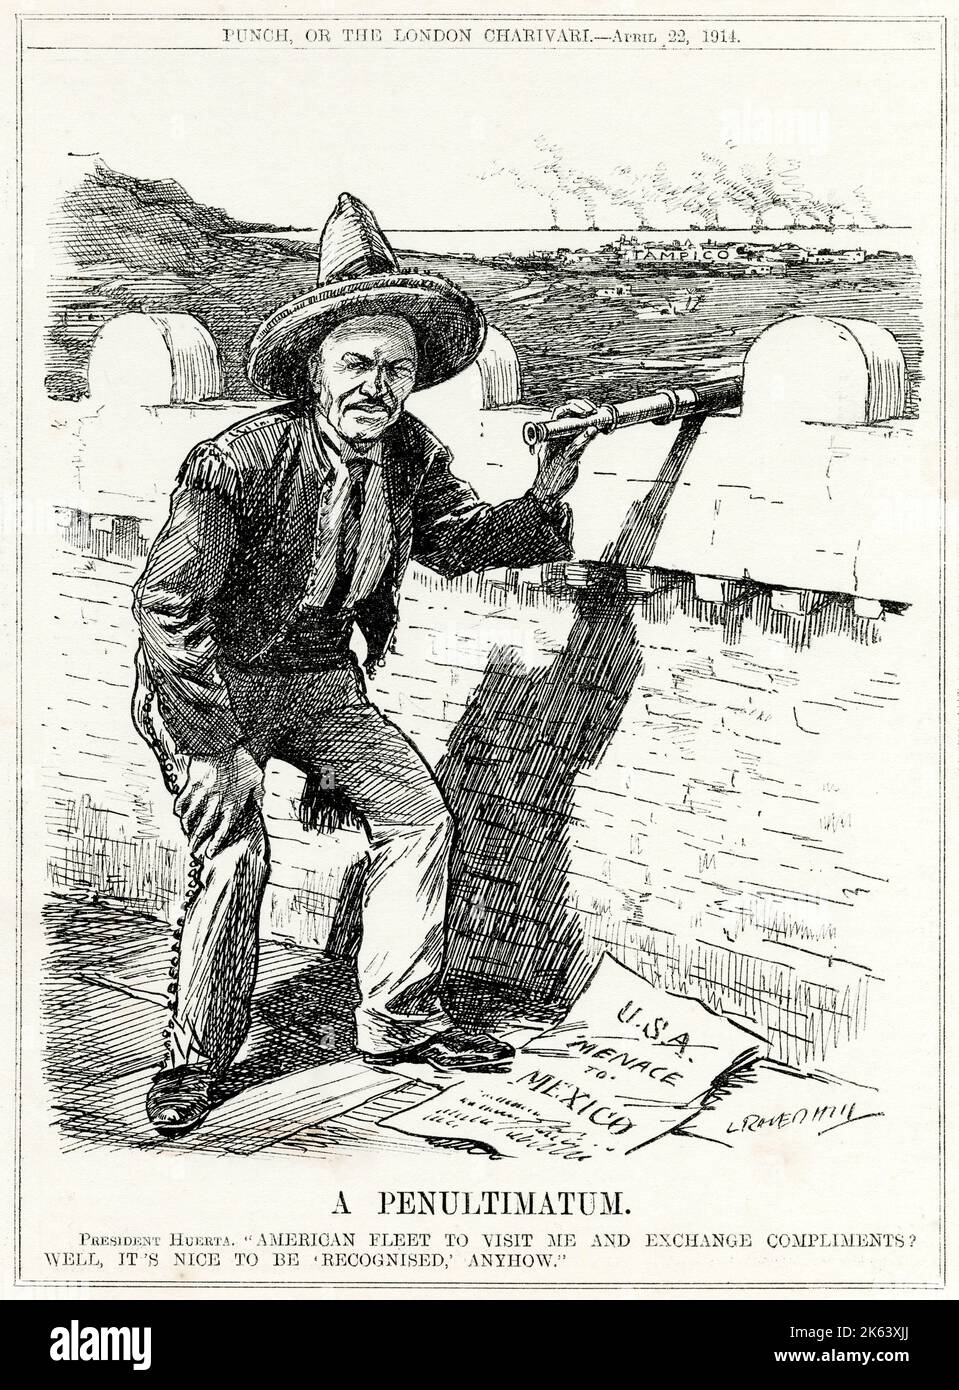 &quot;A Penultimatum&quot; - A Punch magazine satirical cartoon of the American intervention with the Mexican Revolution in 1914. Despite conspiring with Huerta to overthrow Madera and establish a new government, the U.S. then refused to recognise the Huerta regime. General Huerta in stereotypical Mexican clothes holds a spyglass resting on a wall, with the port of Tampico in the distance, and U.S. naval ships farther out at sea. A paper with the words &quot;USA Menace to Mexico&quot; lies at Huerta's feet. This refers to the Tampico Affair were several U.S. sailors were forcibly detained and Stock Photo